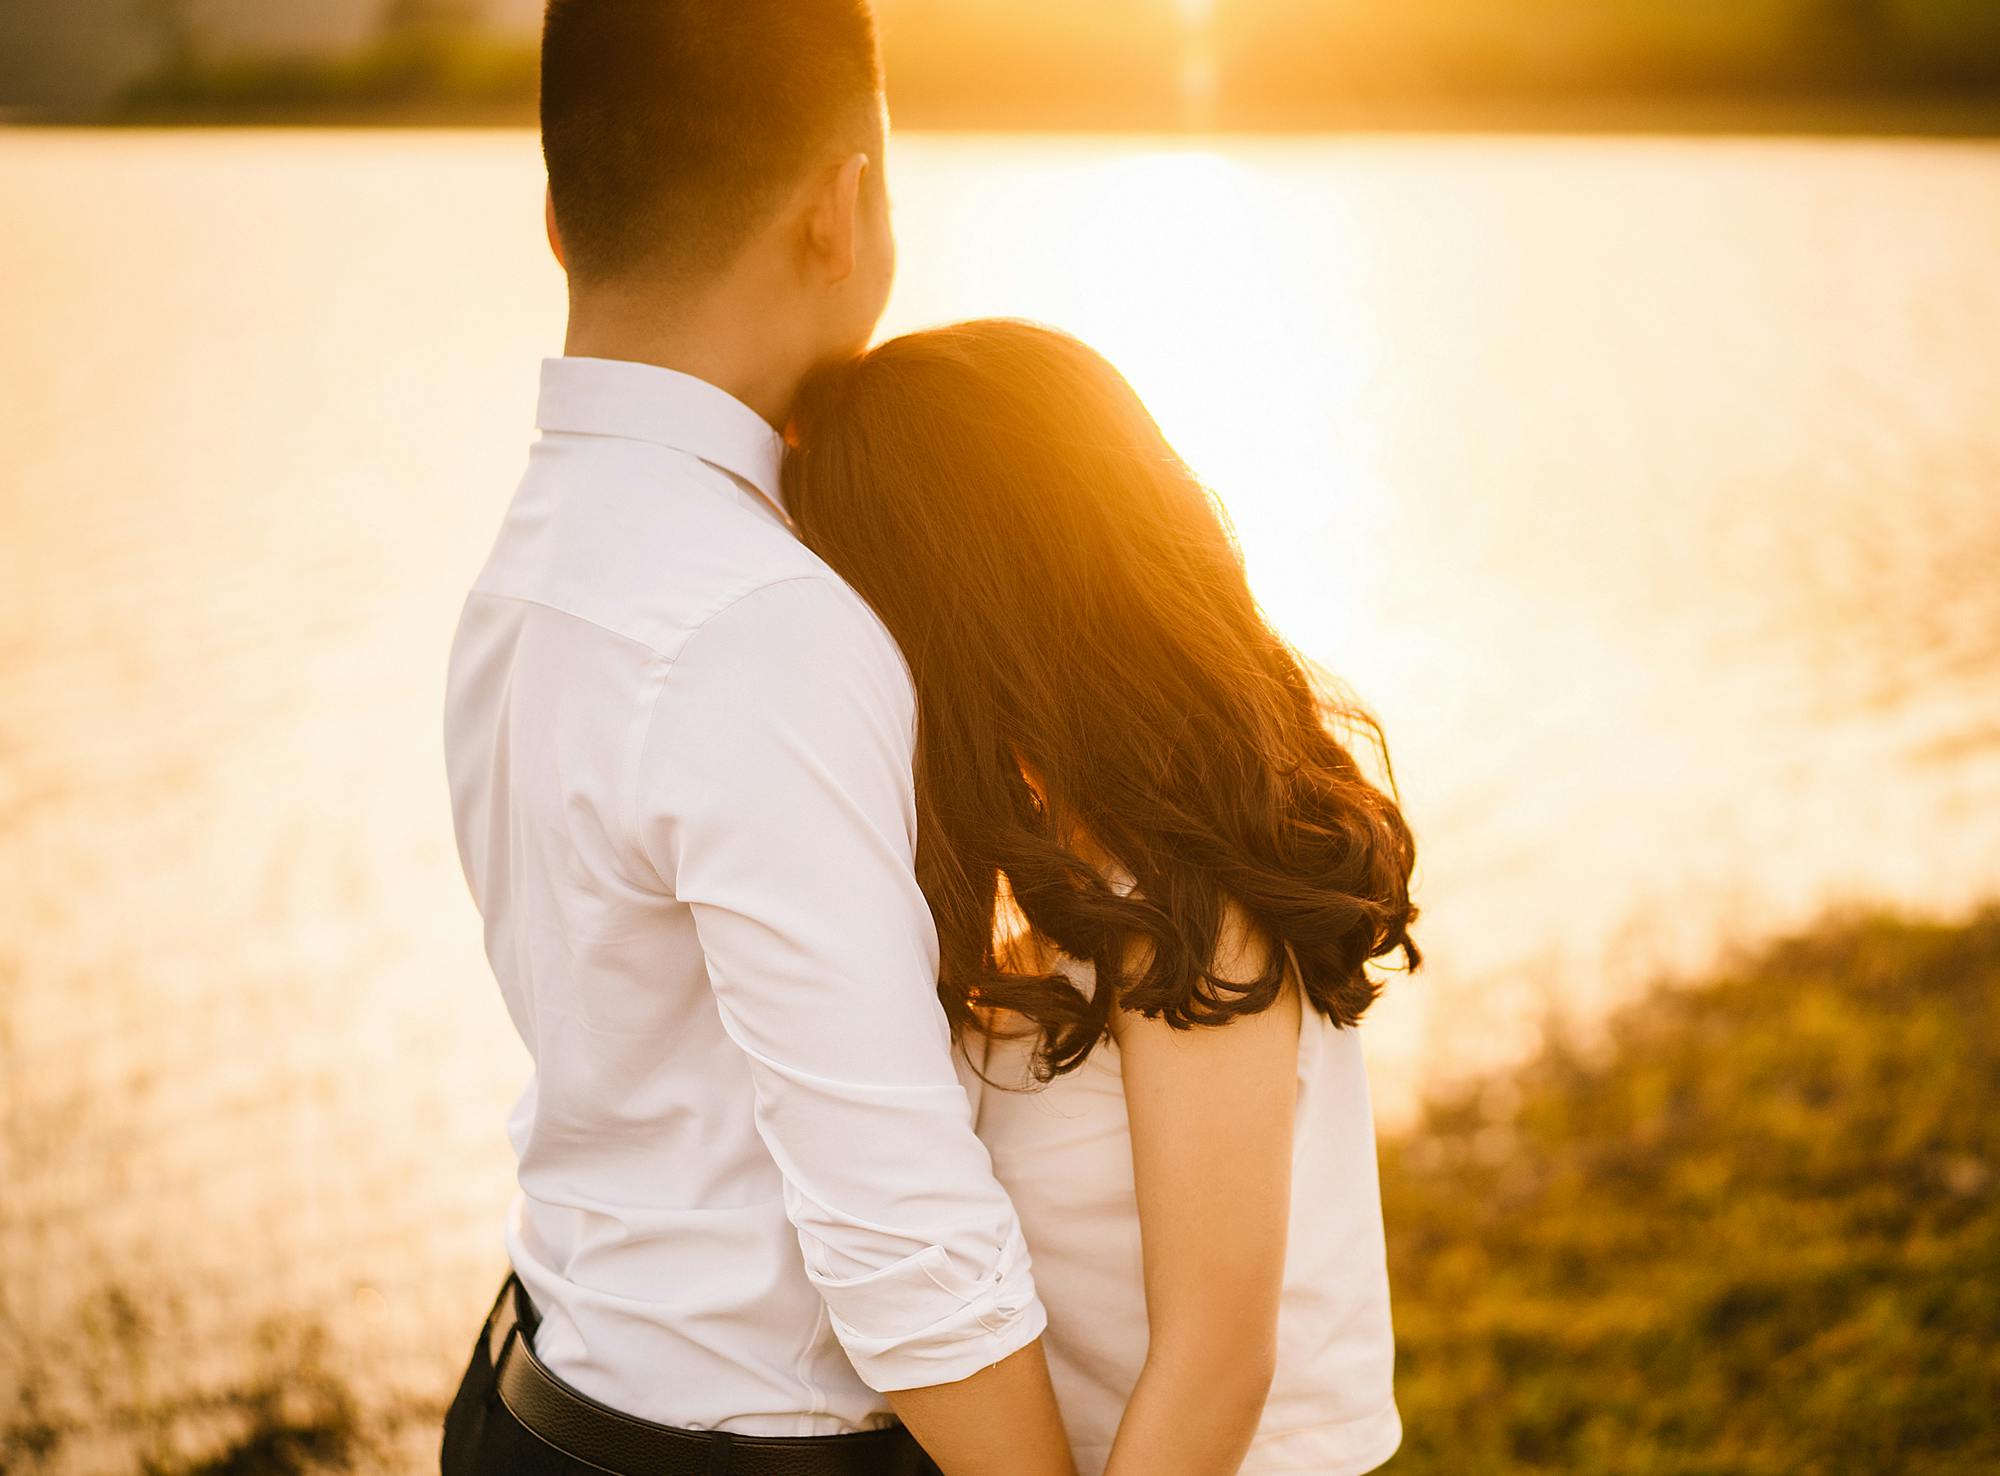 A couple in front of a body of water. | Photo: Pexels